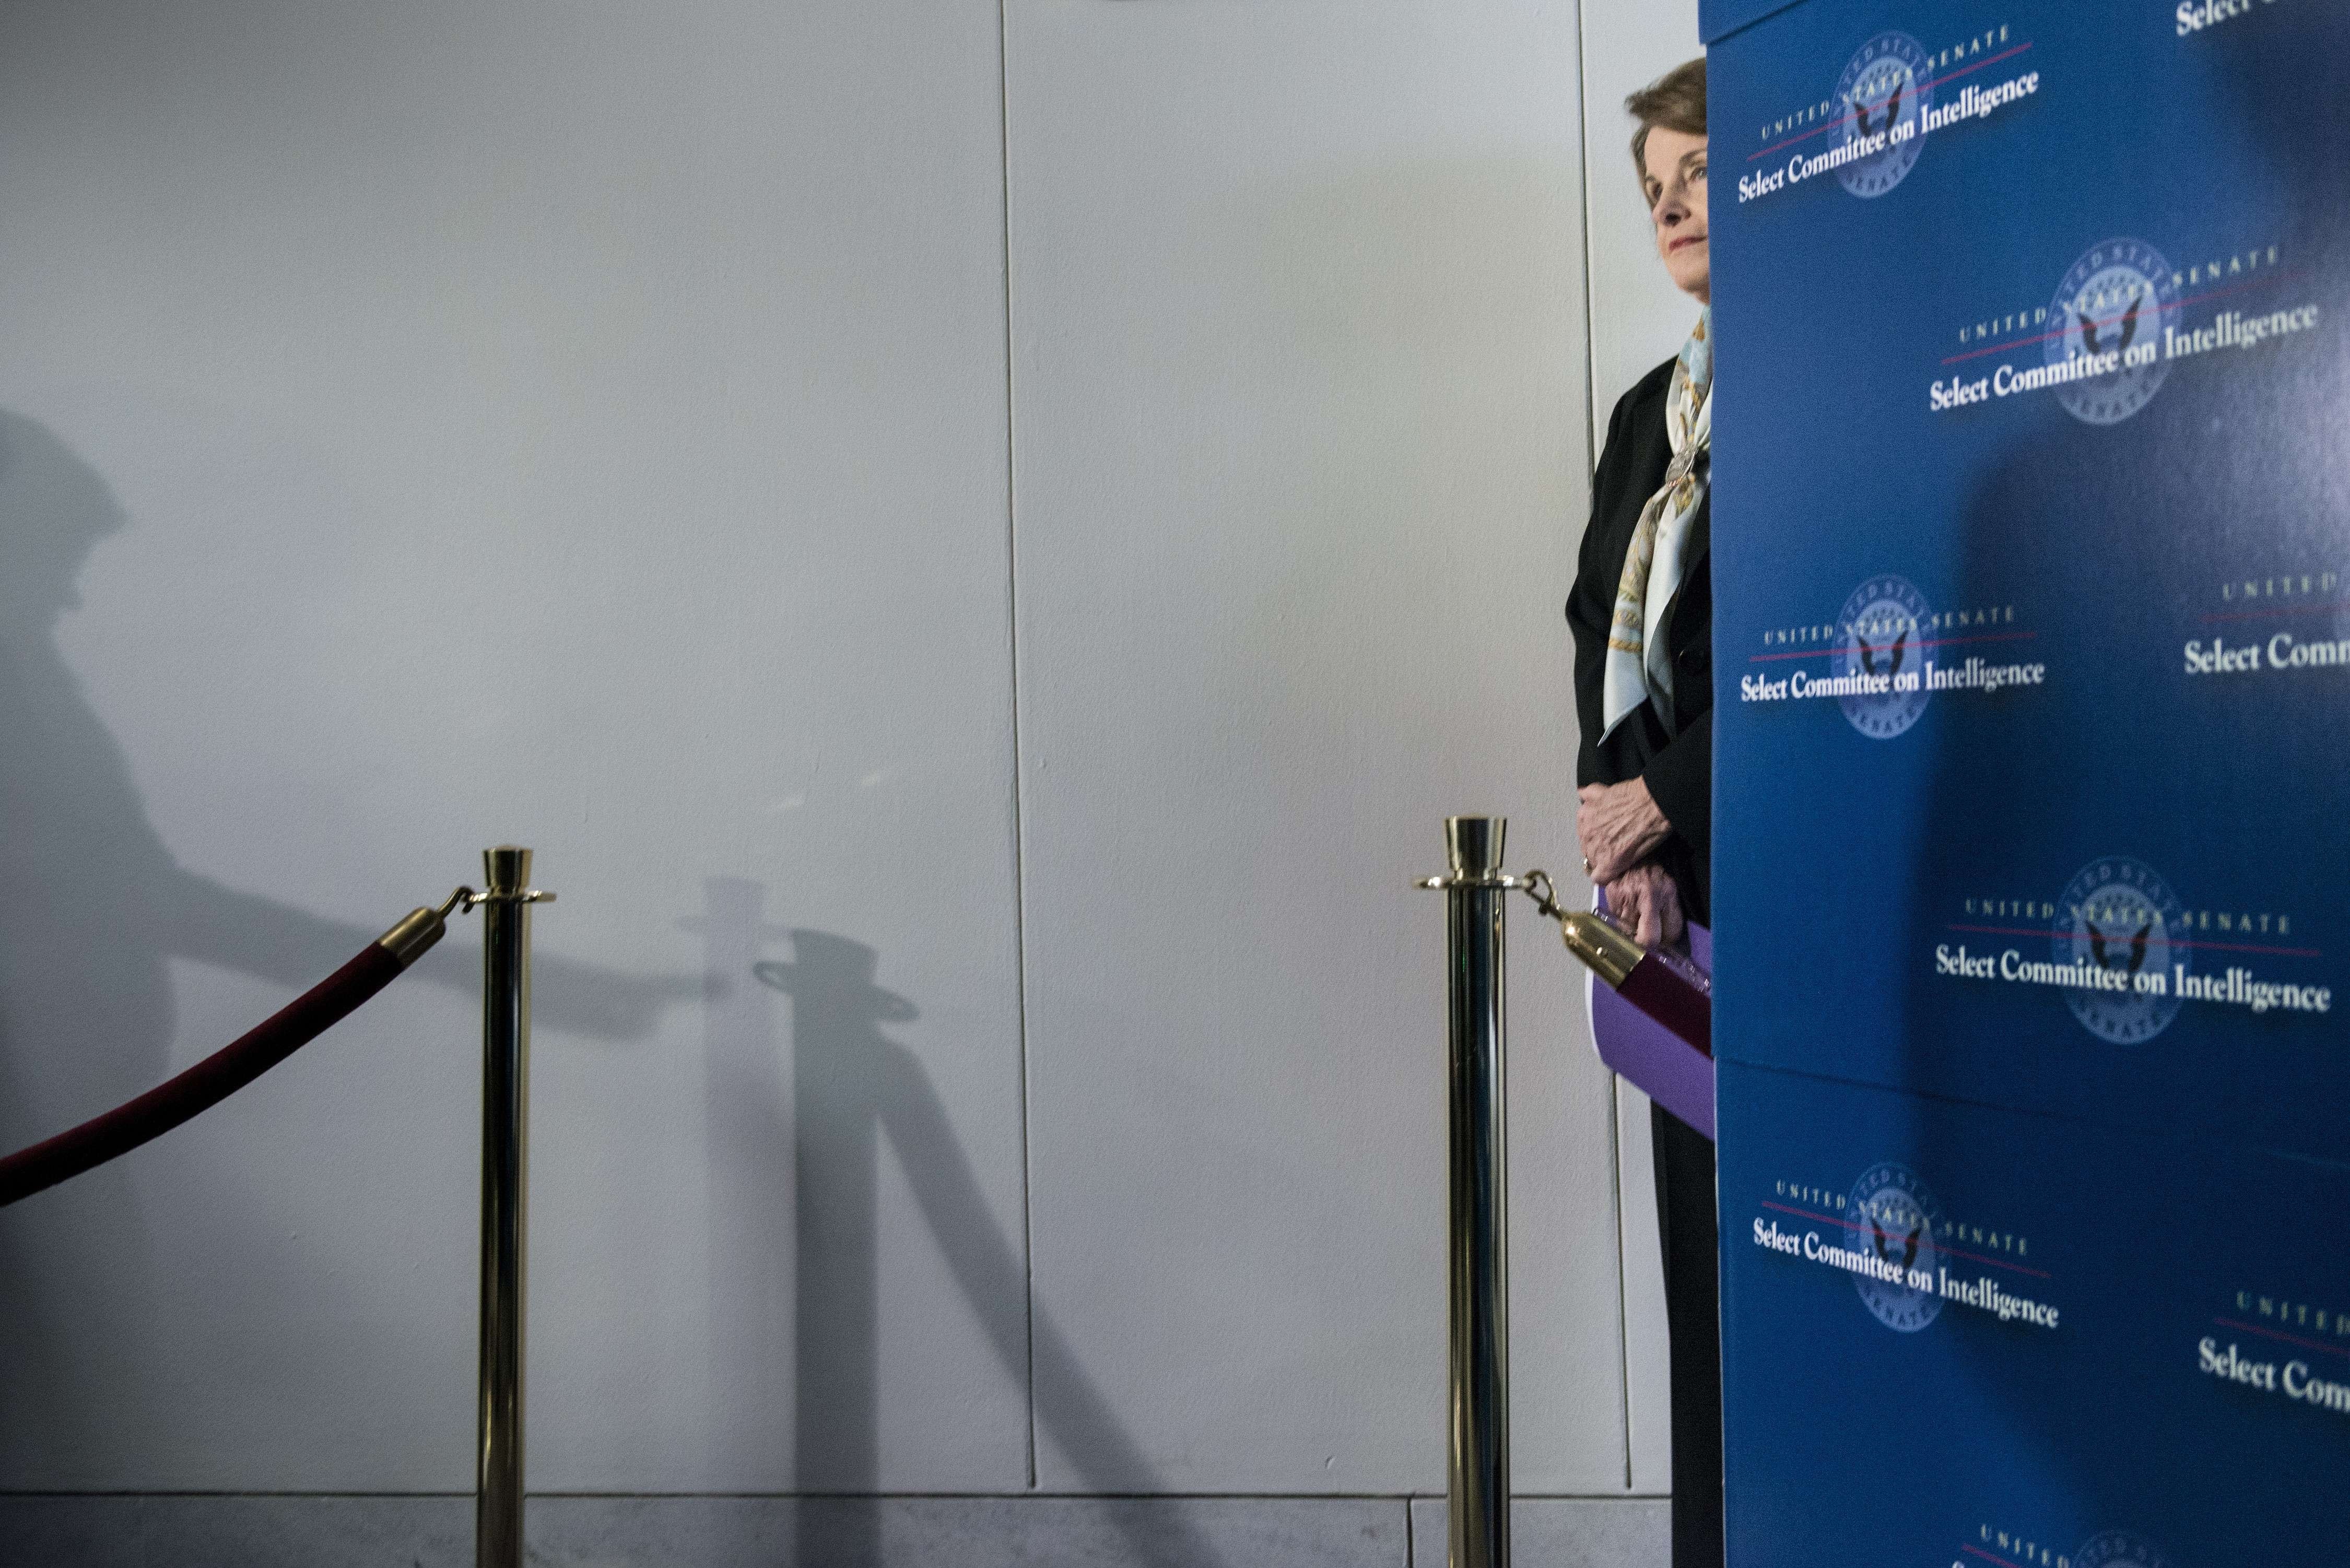 California Senator Dianne Feinstein waits to speak to the media after a closed meeting of the Senate Intelligence Committee on Capitol Hill in Washington on April 3, 2014 (Brendan Smialowski—AFP/Getty Images)